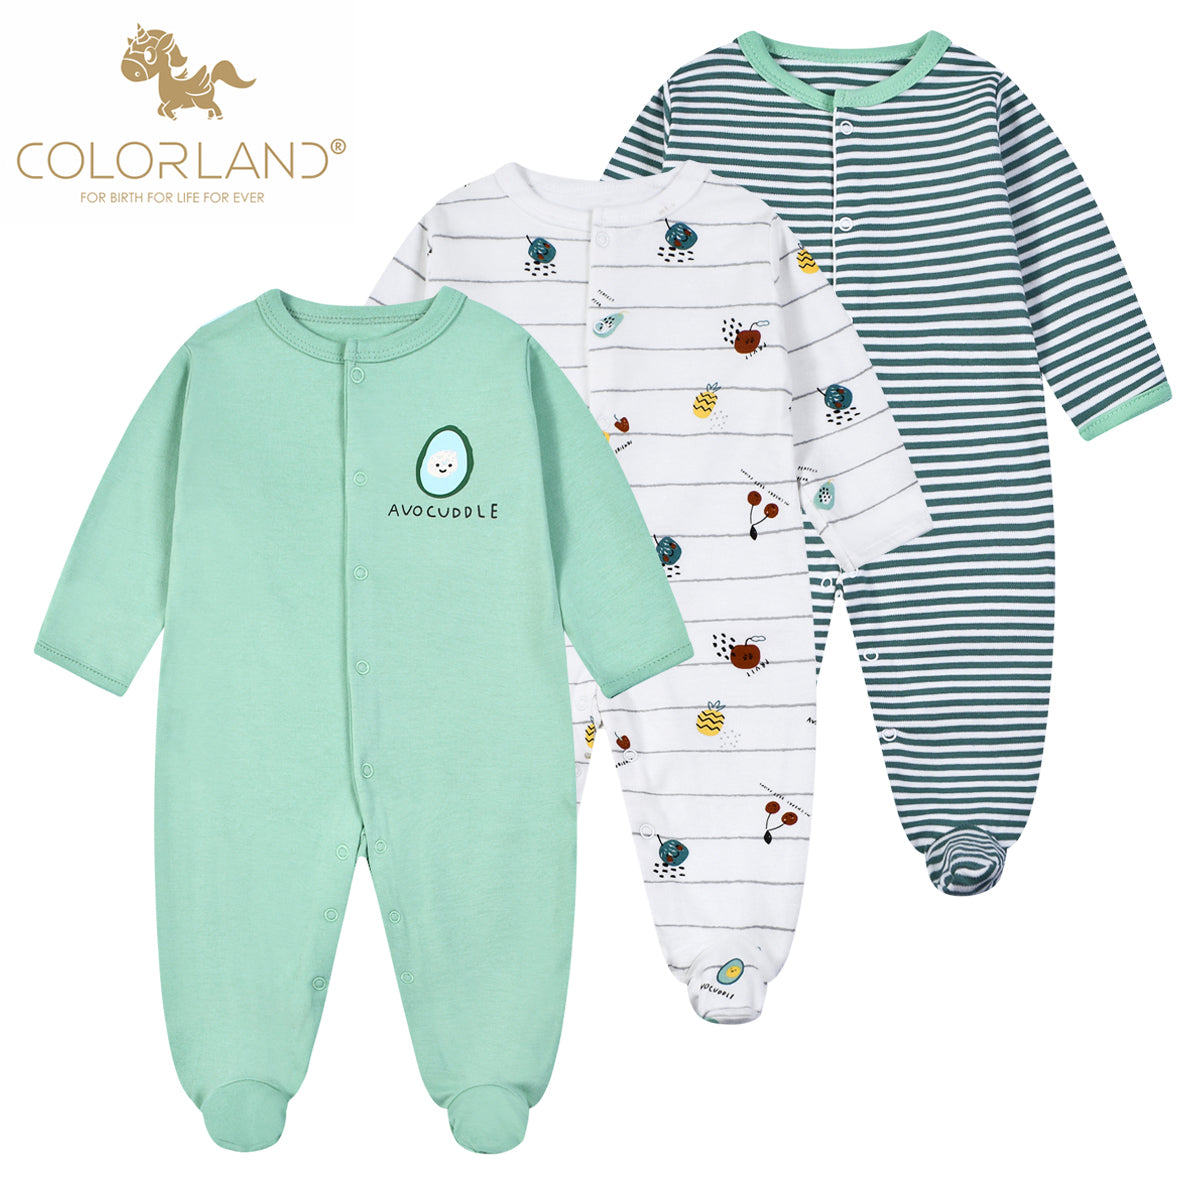 Colorland 3-pack Dylan Boys Long Sleeve Baby Rompers